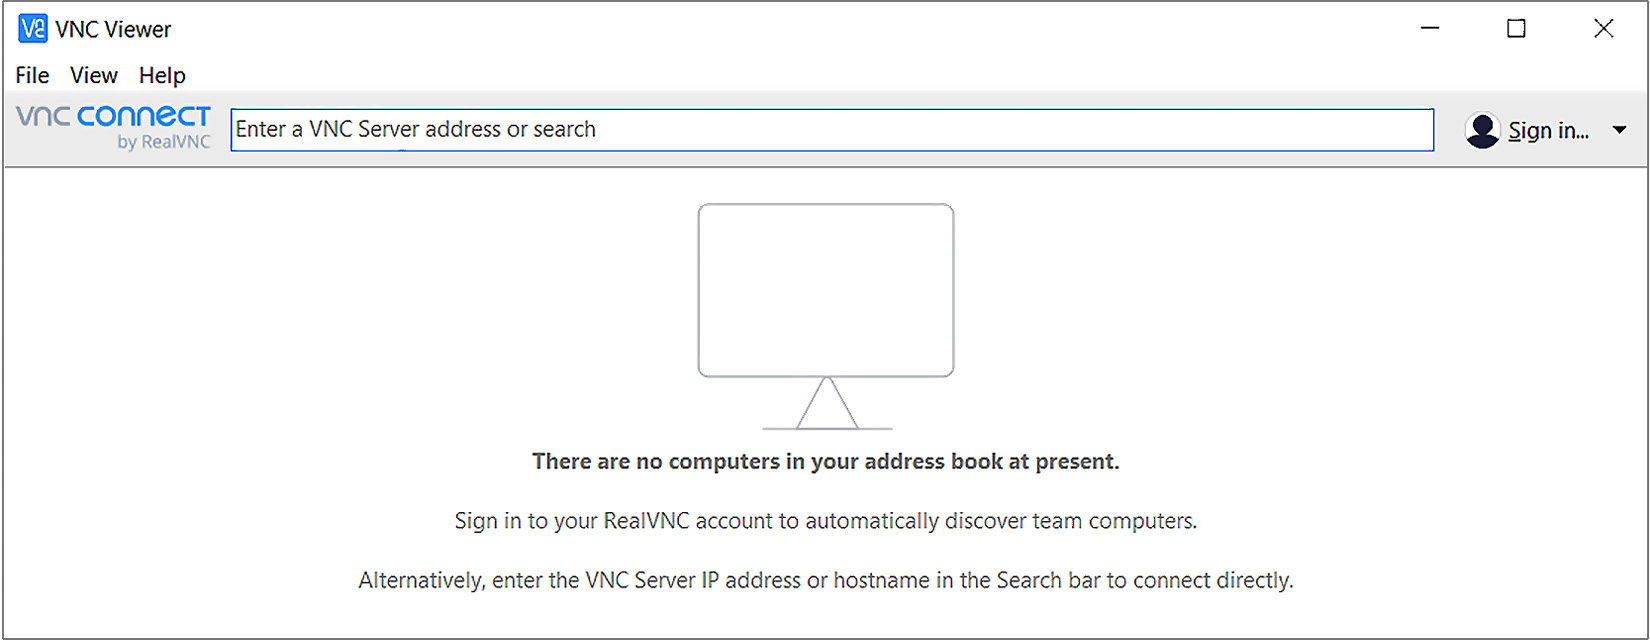 Figure 1.40 – The VNC Viewer application
